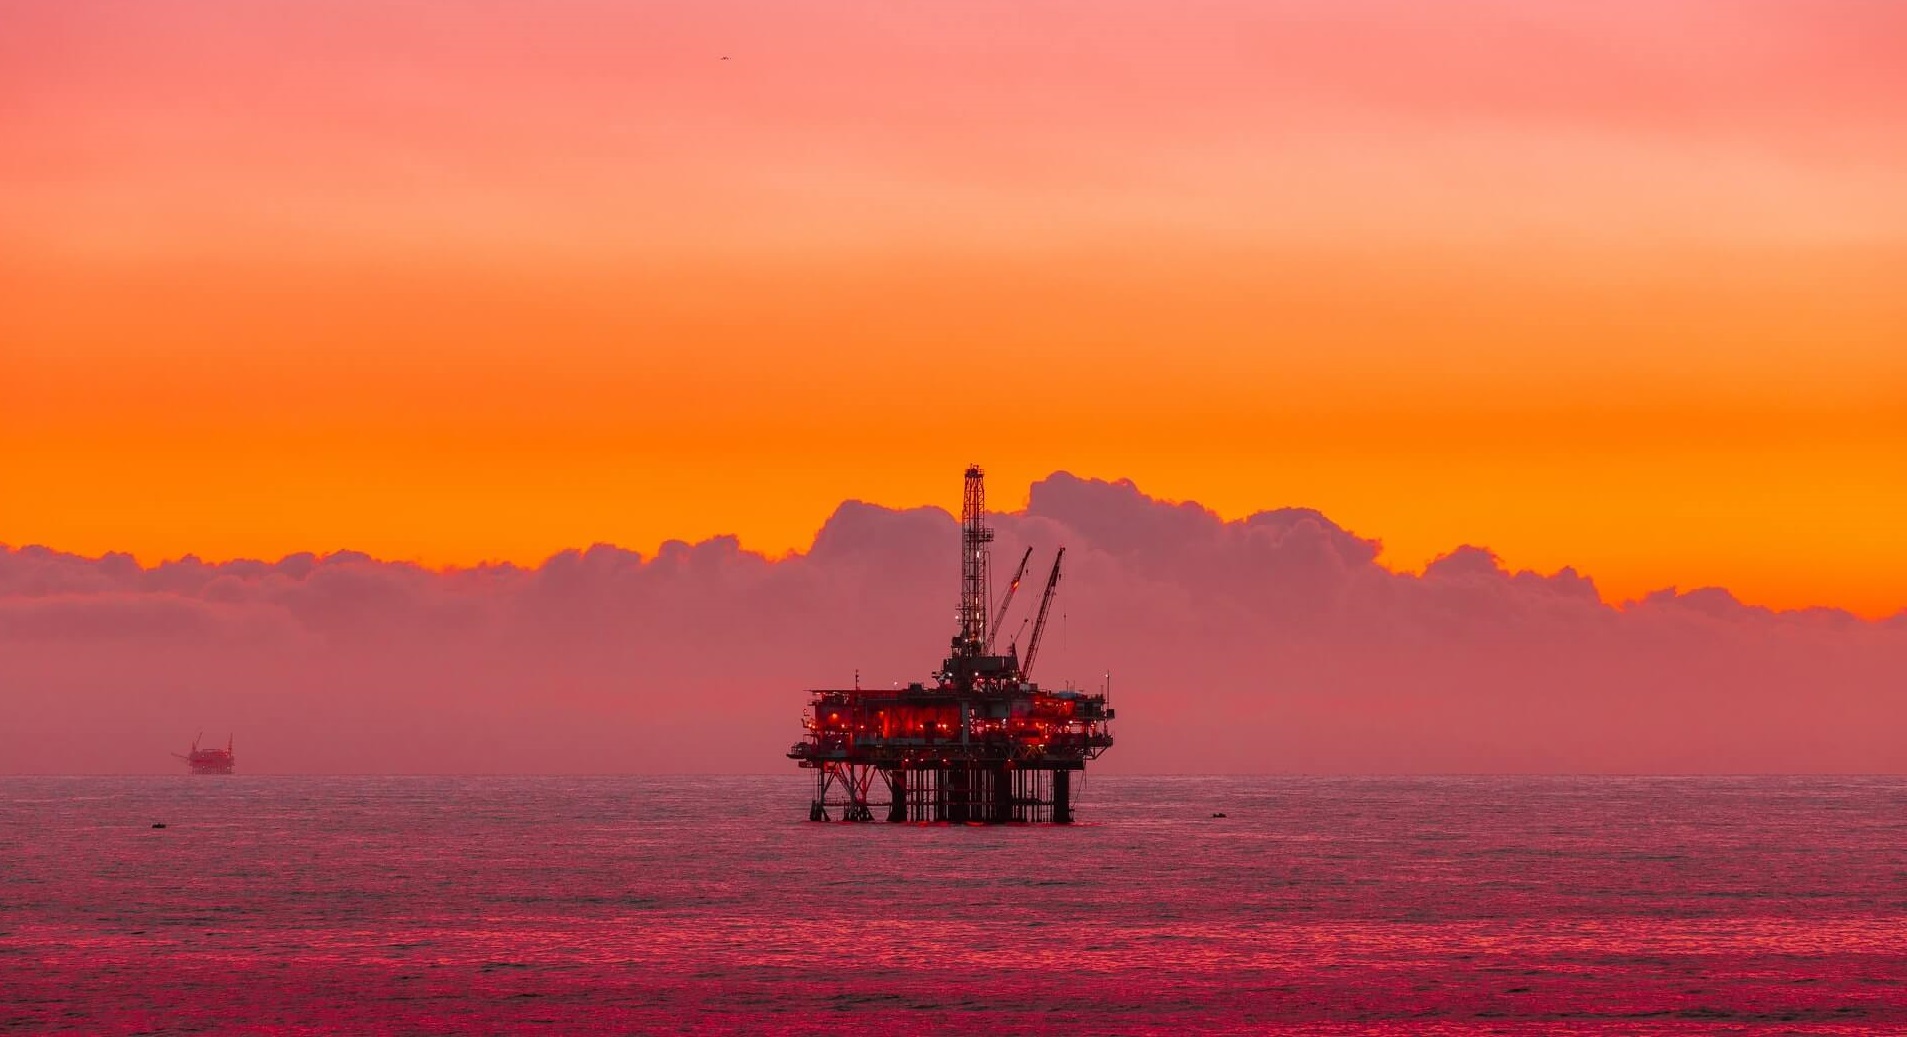 Huntington Beach oil rig with oil spill, 2021. Photo by Arvind Vallabh on Unsplash.